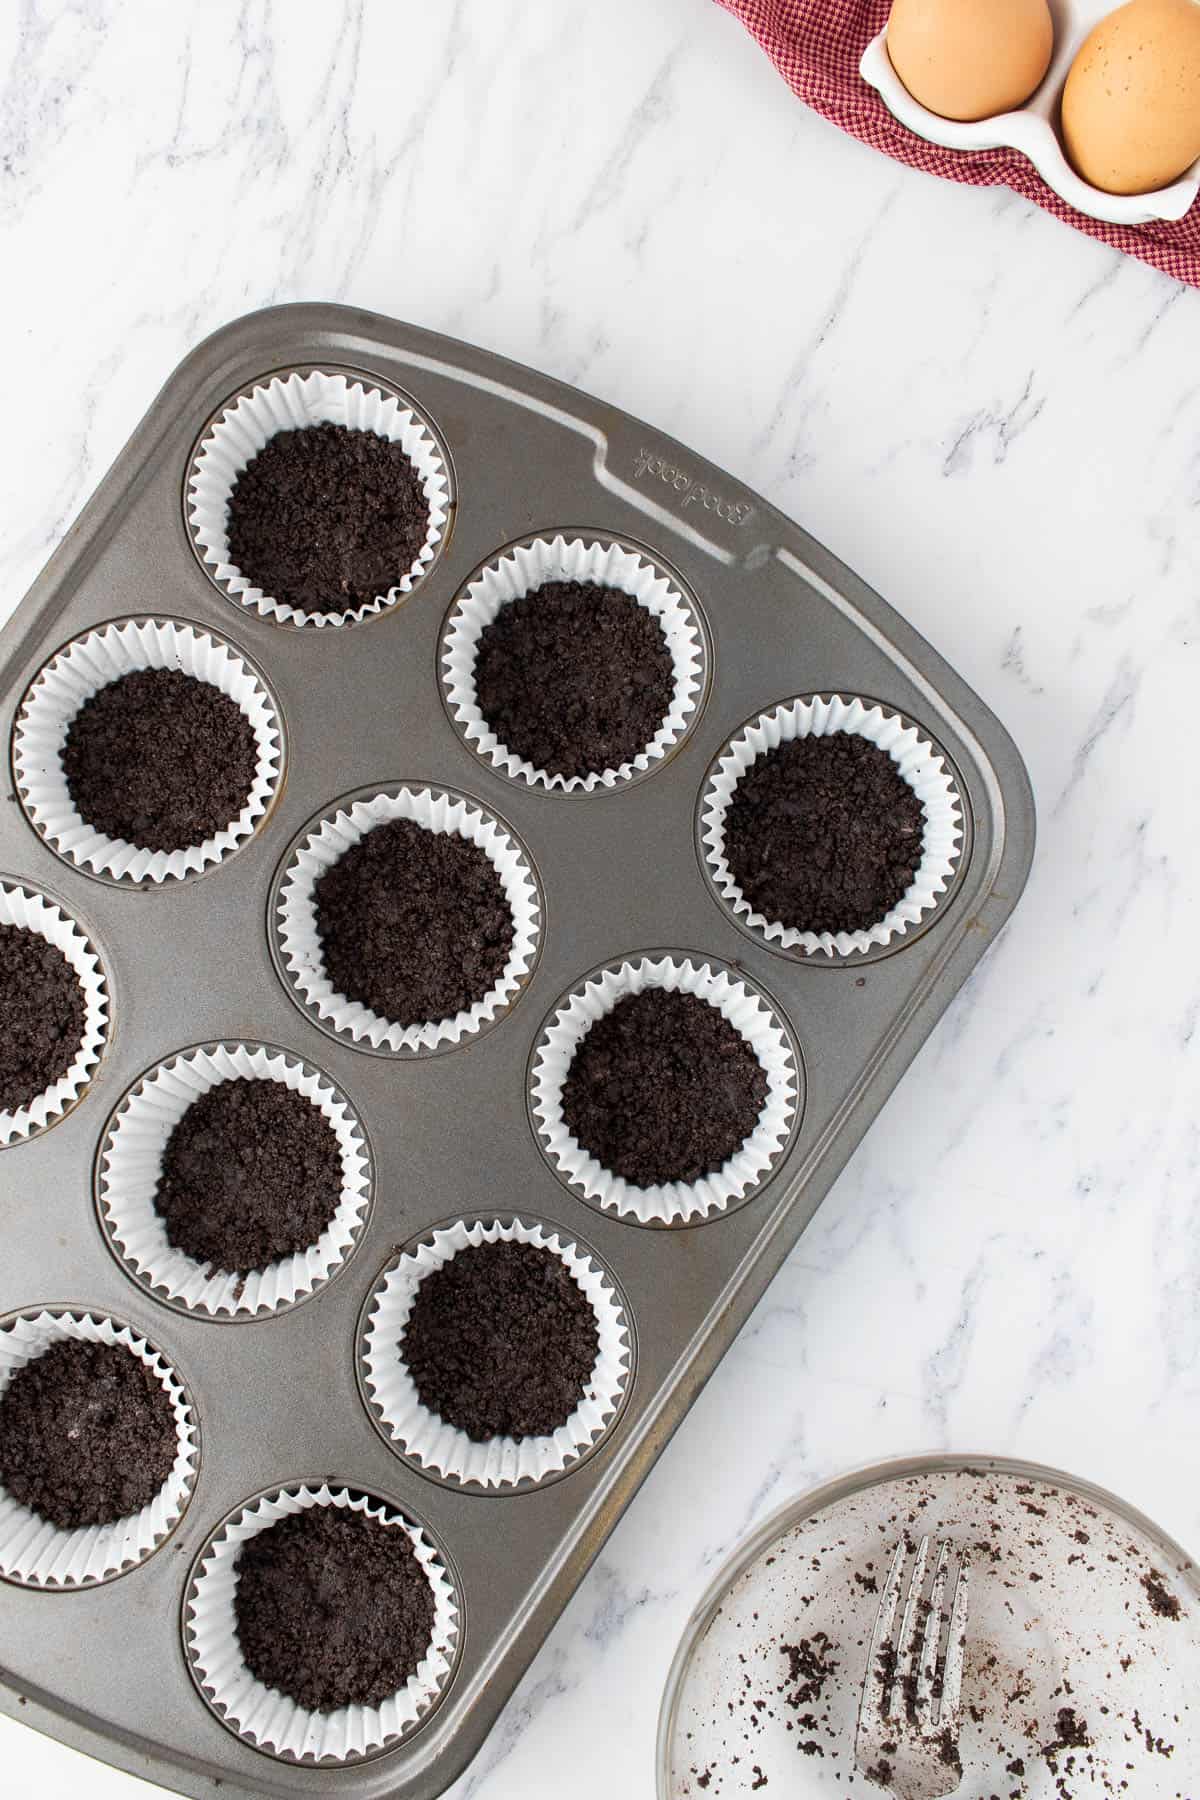 Adding crushed Oreo crust to muffin liners in a cupcake pan.